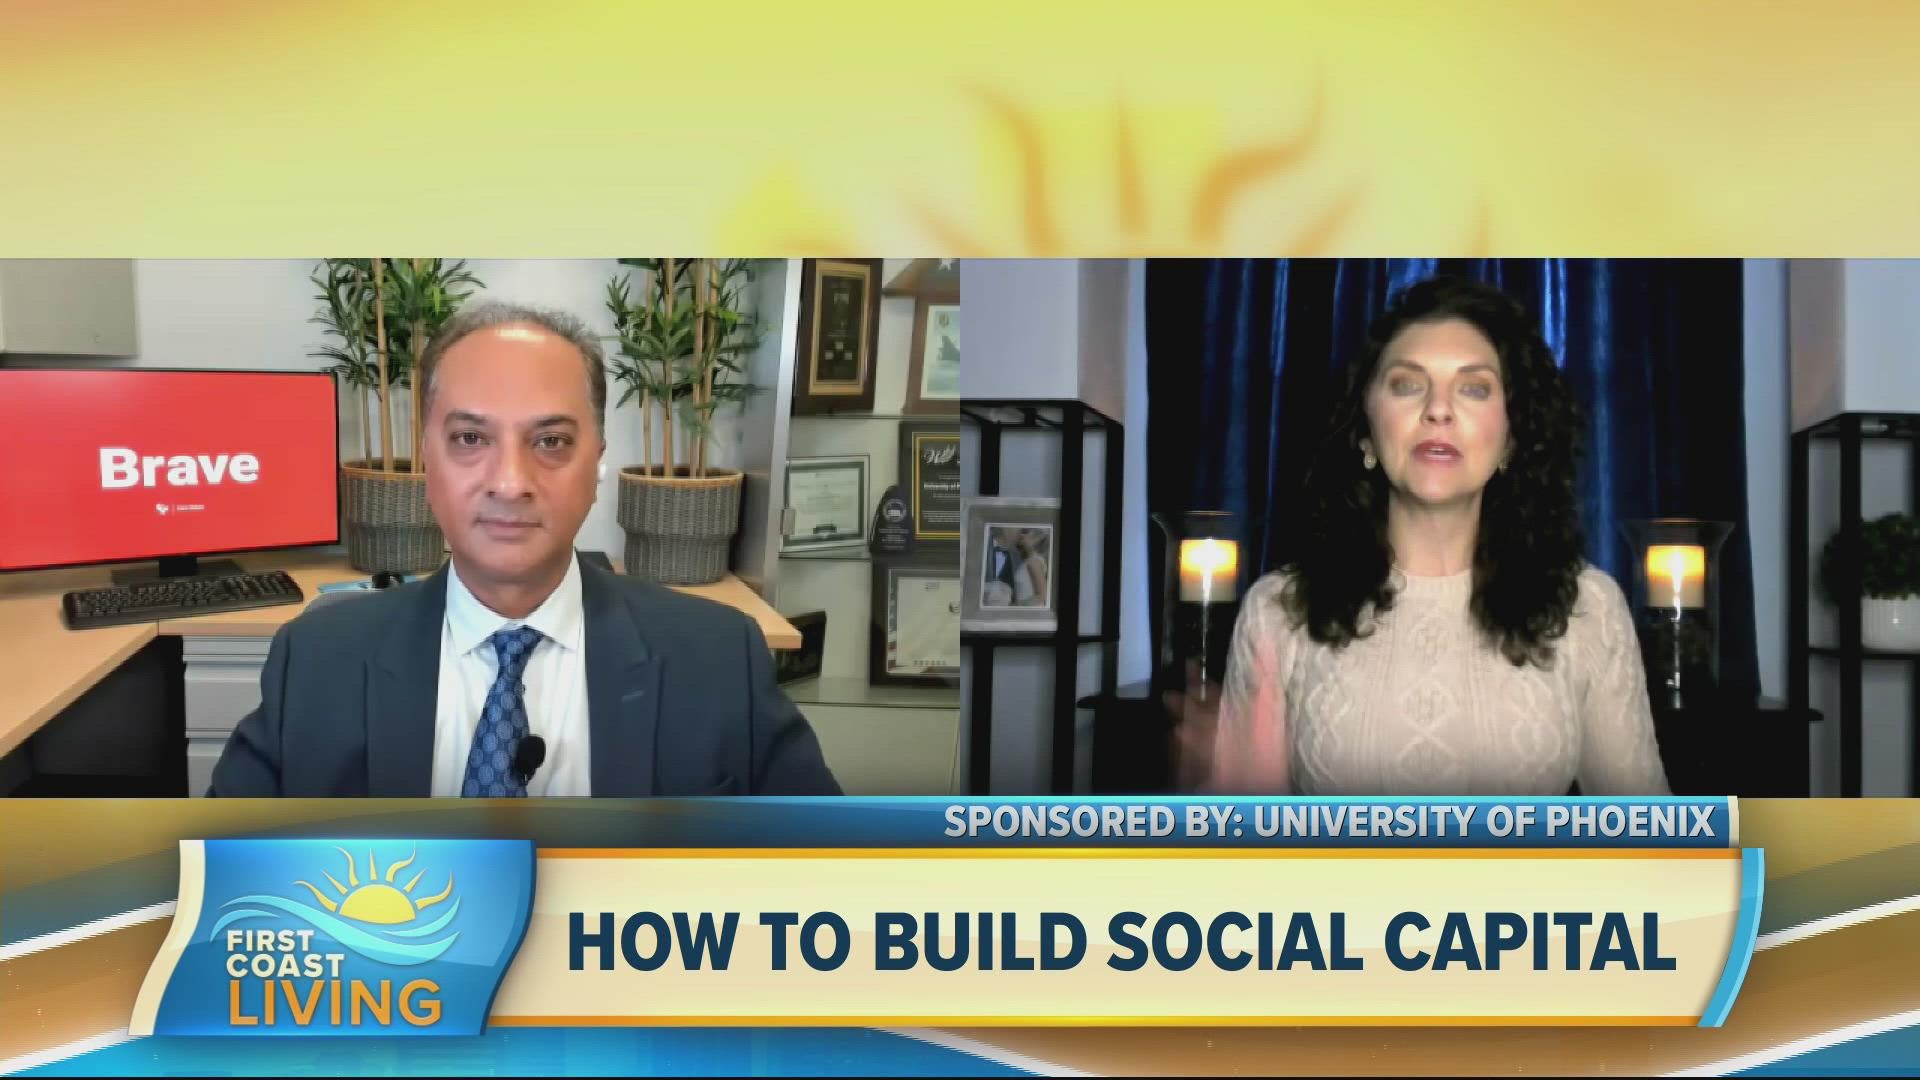 University of Phoenix COO, Raghu Krishnaiah shares the importance of building social capital when it comes to career advancement and job satisfaction.